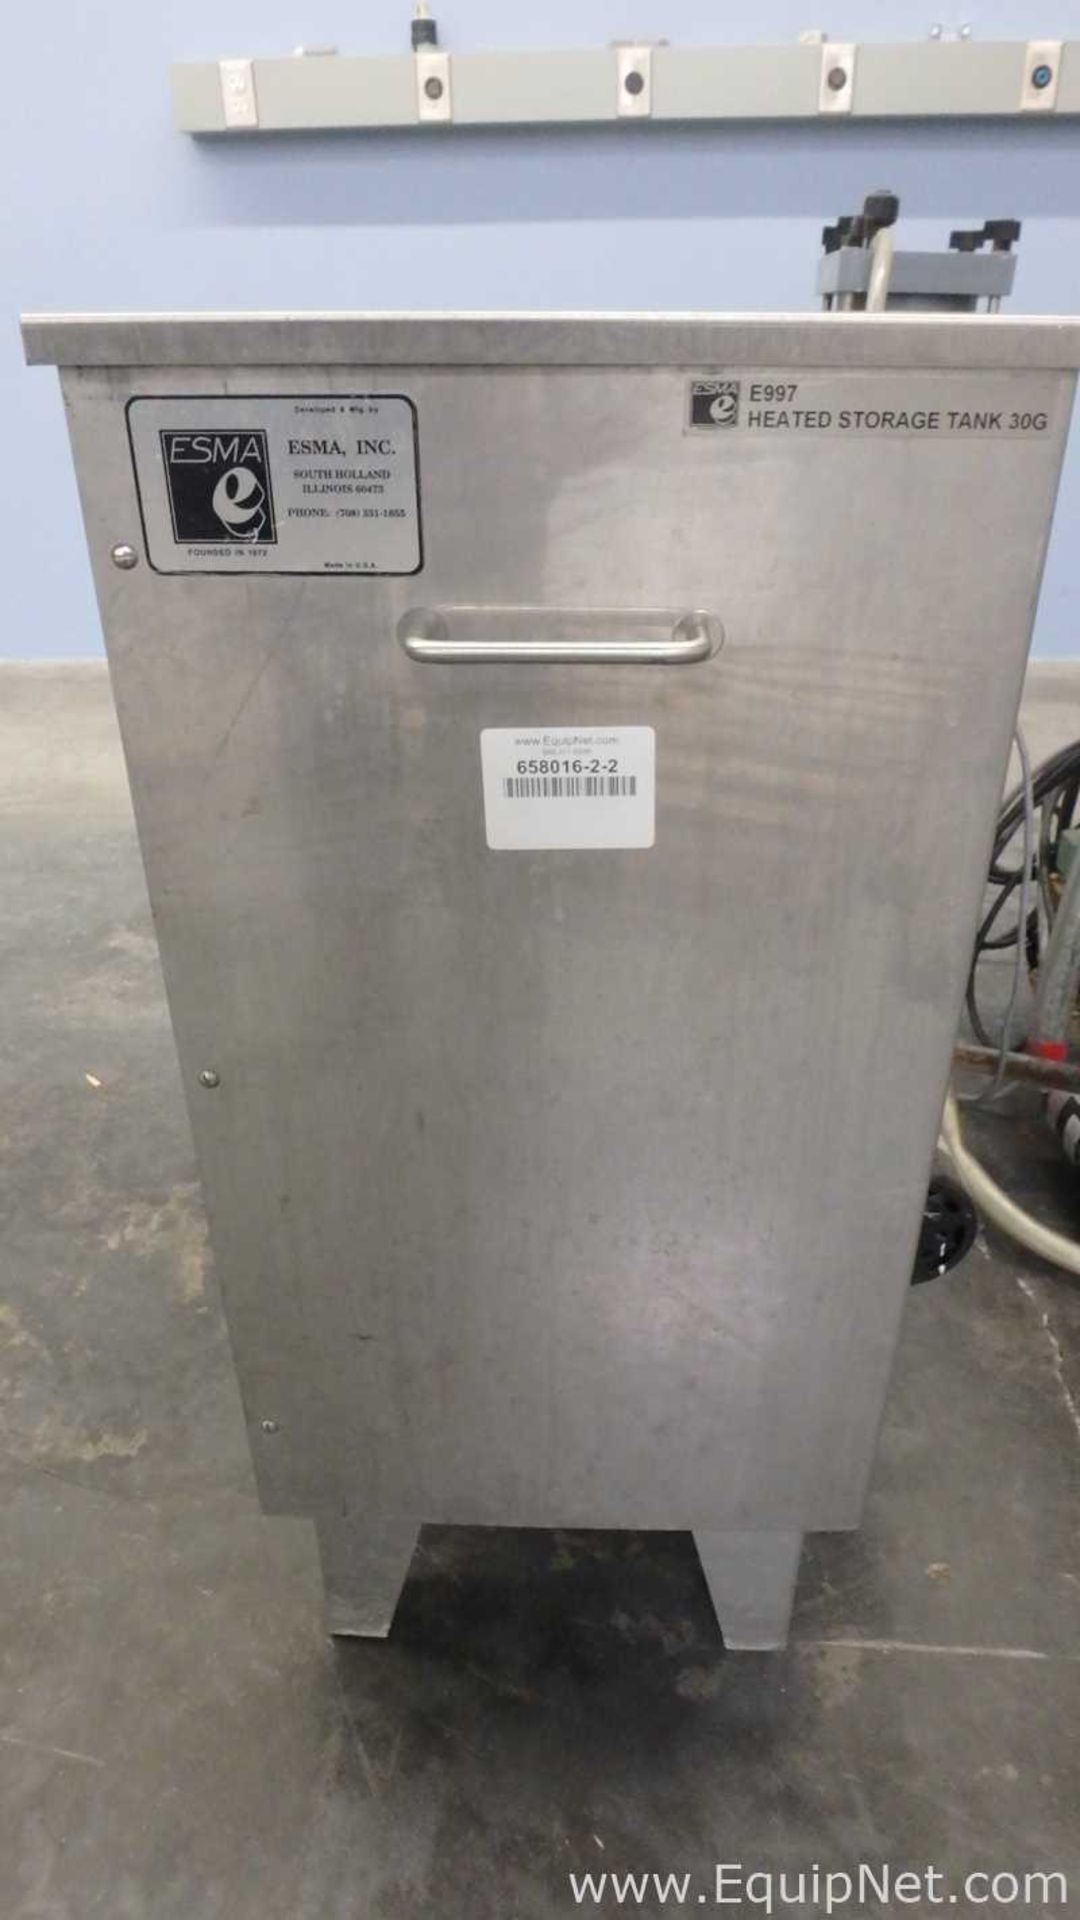 ESMA Inc. E700 Ultrasonic Cleaning System with E997 30Gal Heated Storage Tank - Image 28 of 38